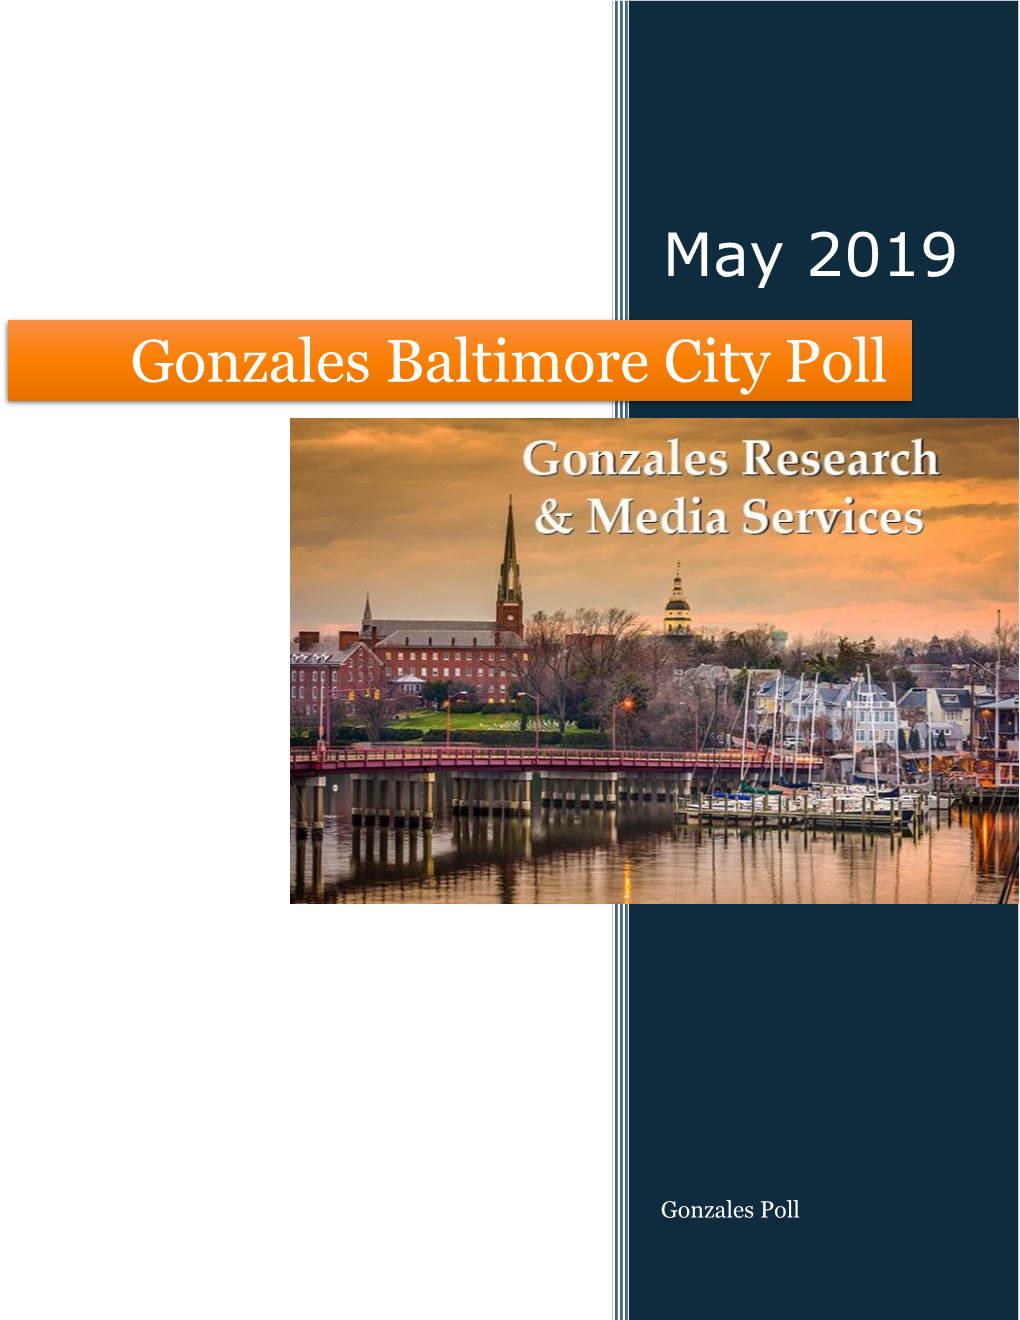 Gonzales Baltimore City Poll